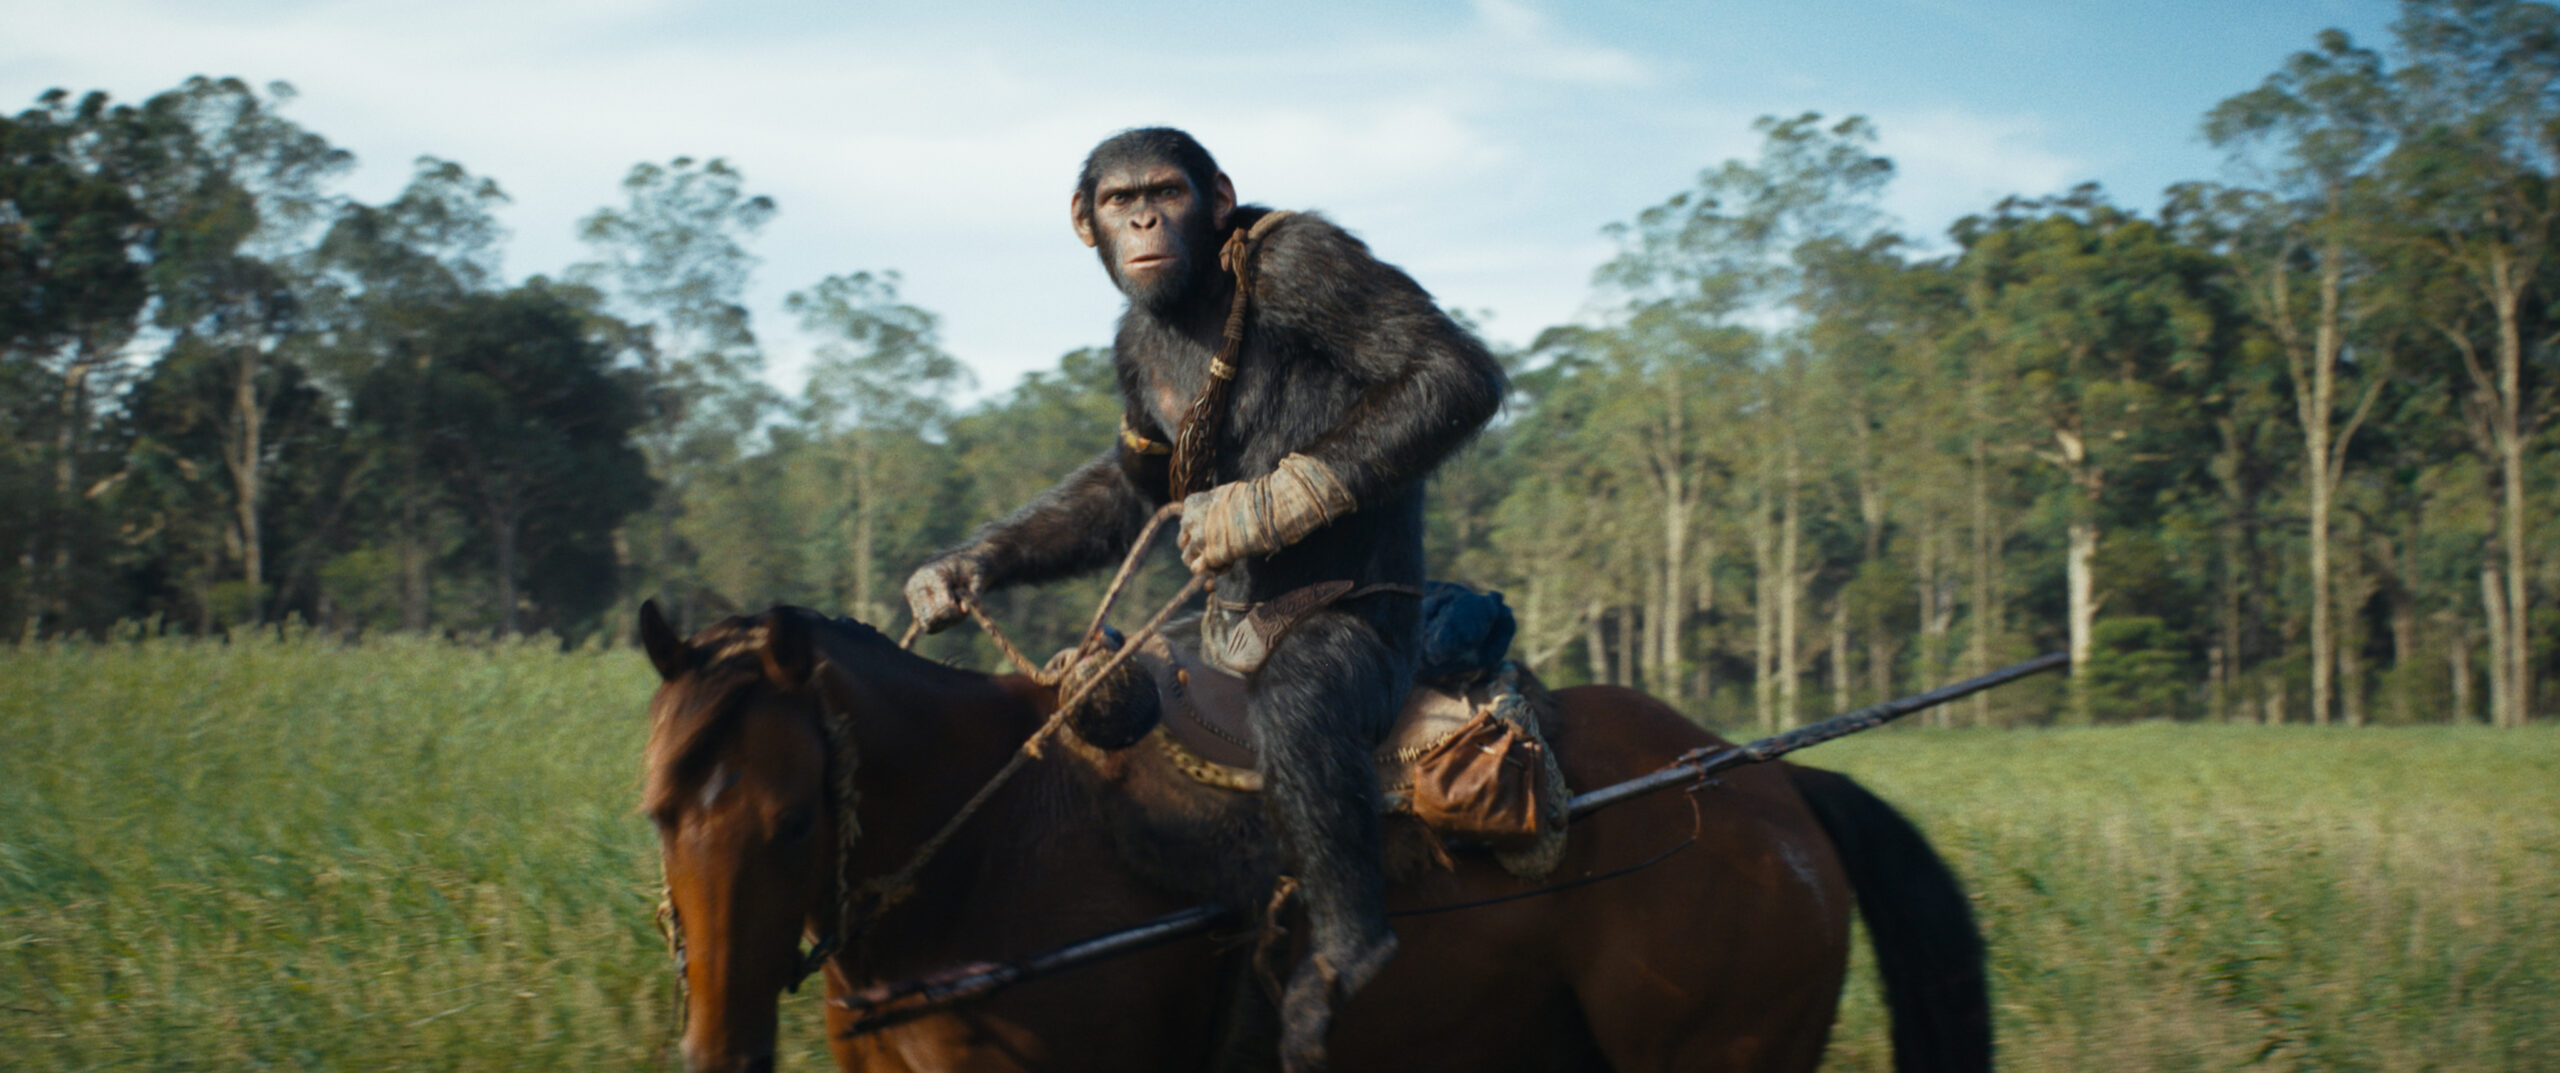 'Kingdom of the Planet of the Apes' Hits PH Theaters May 8—Watch the Trailer Here!